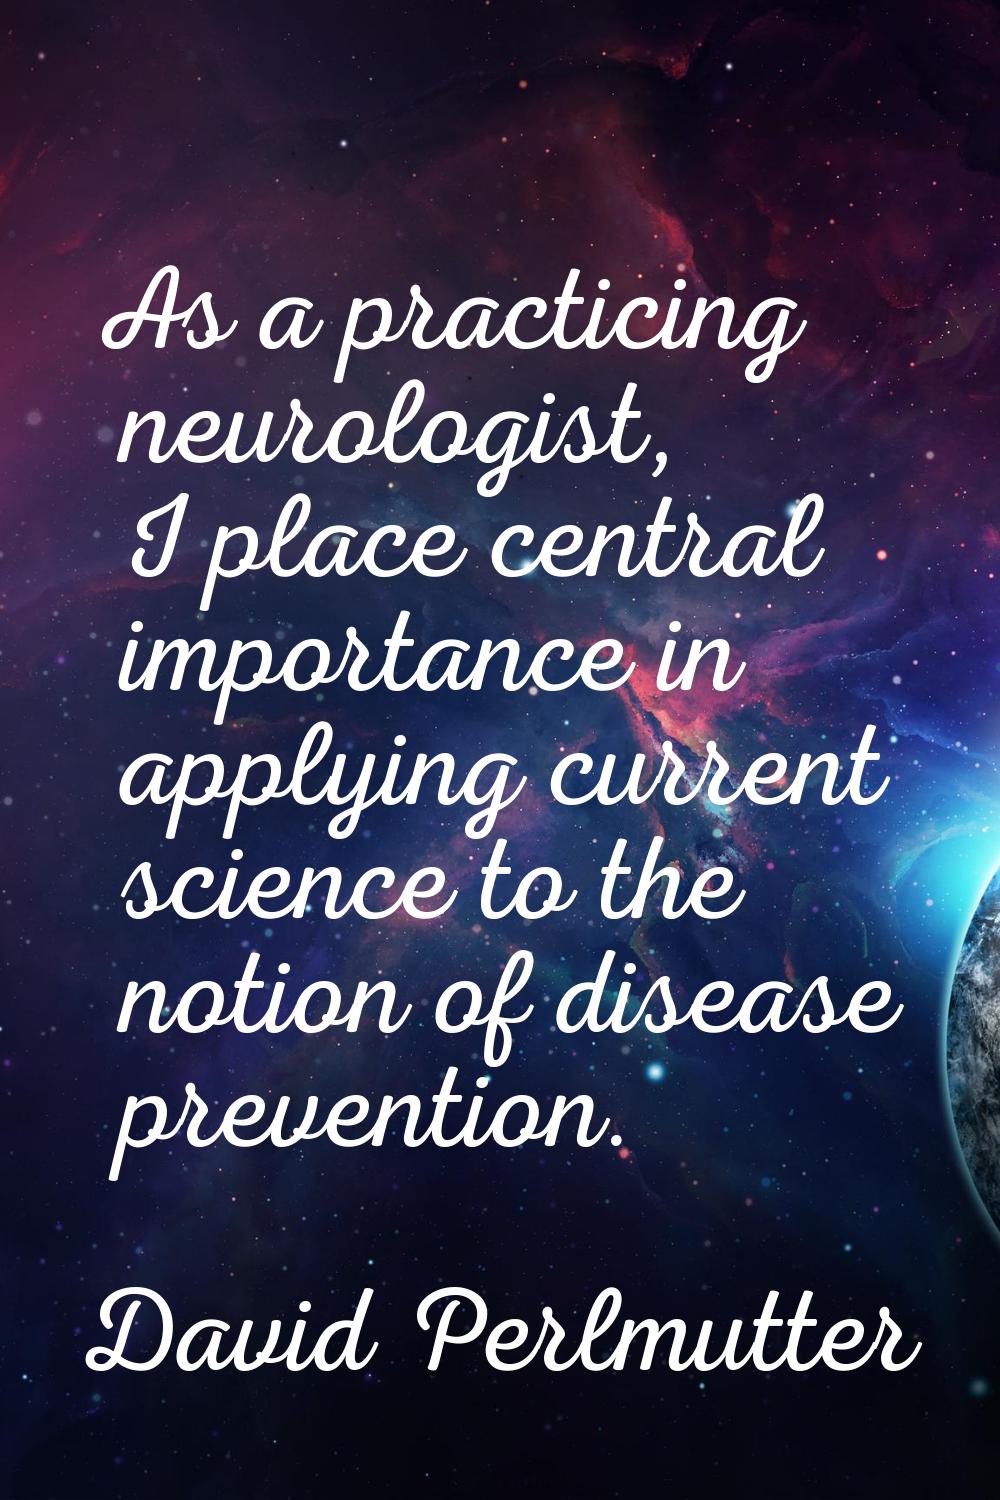 As a practicing neurologist, I place central importance in applying current science to the notion o